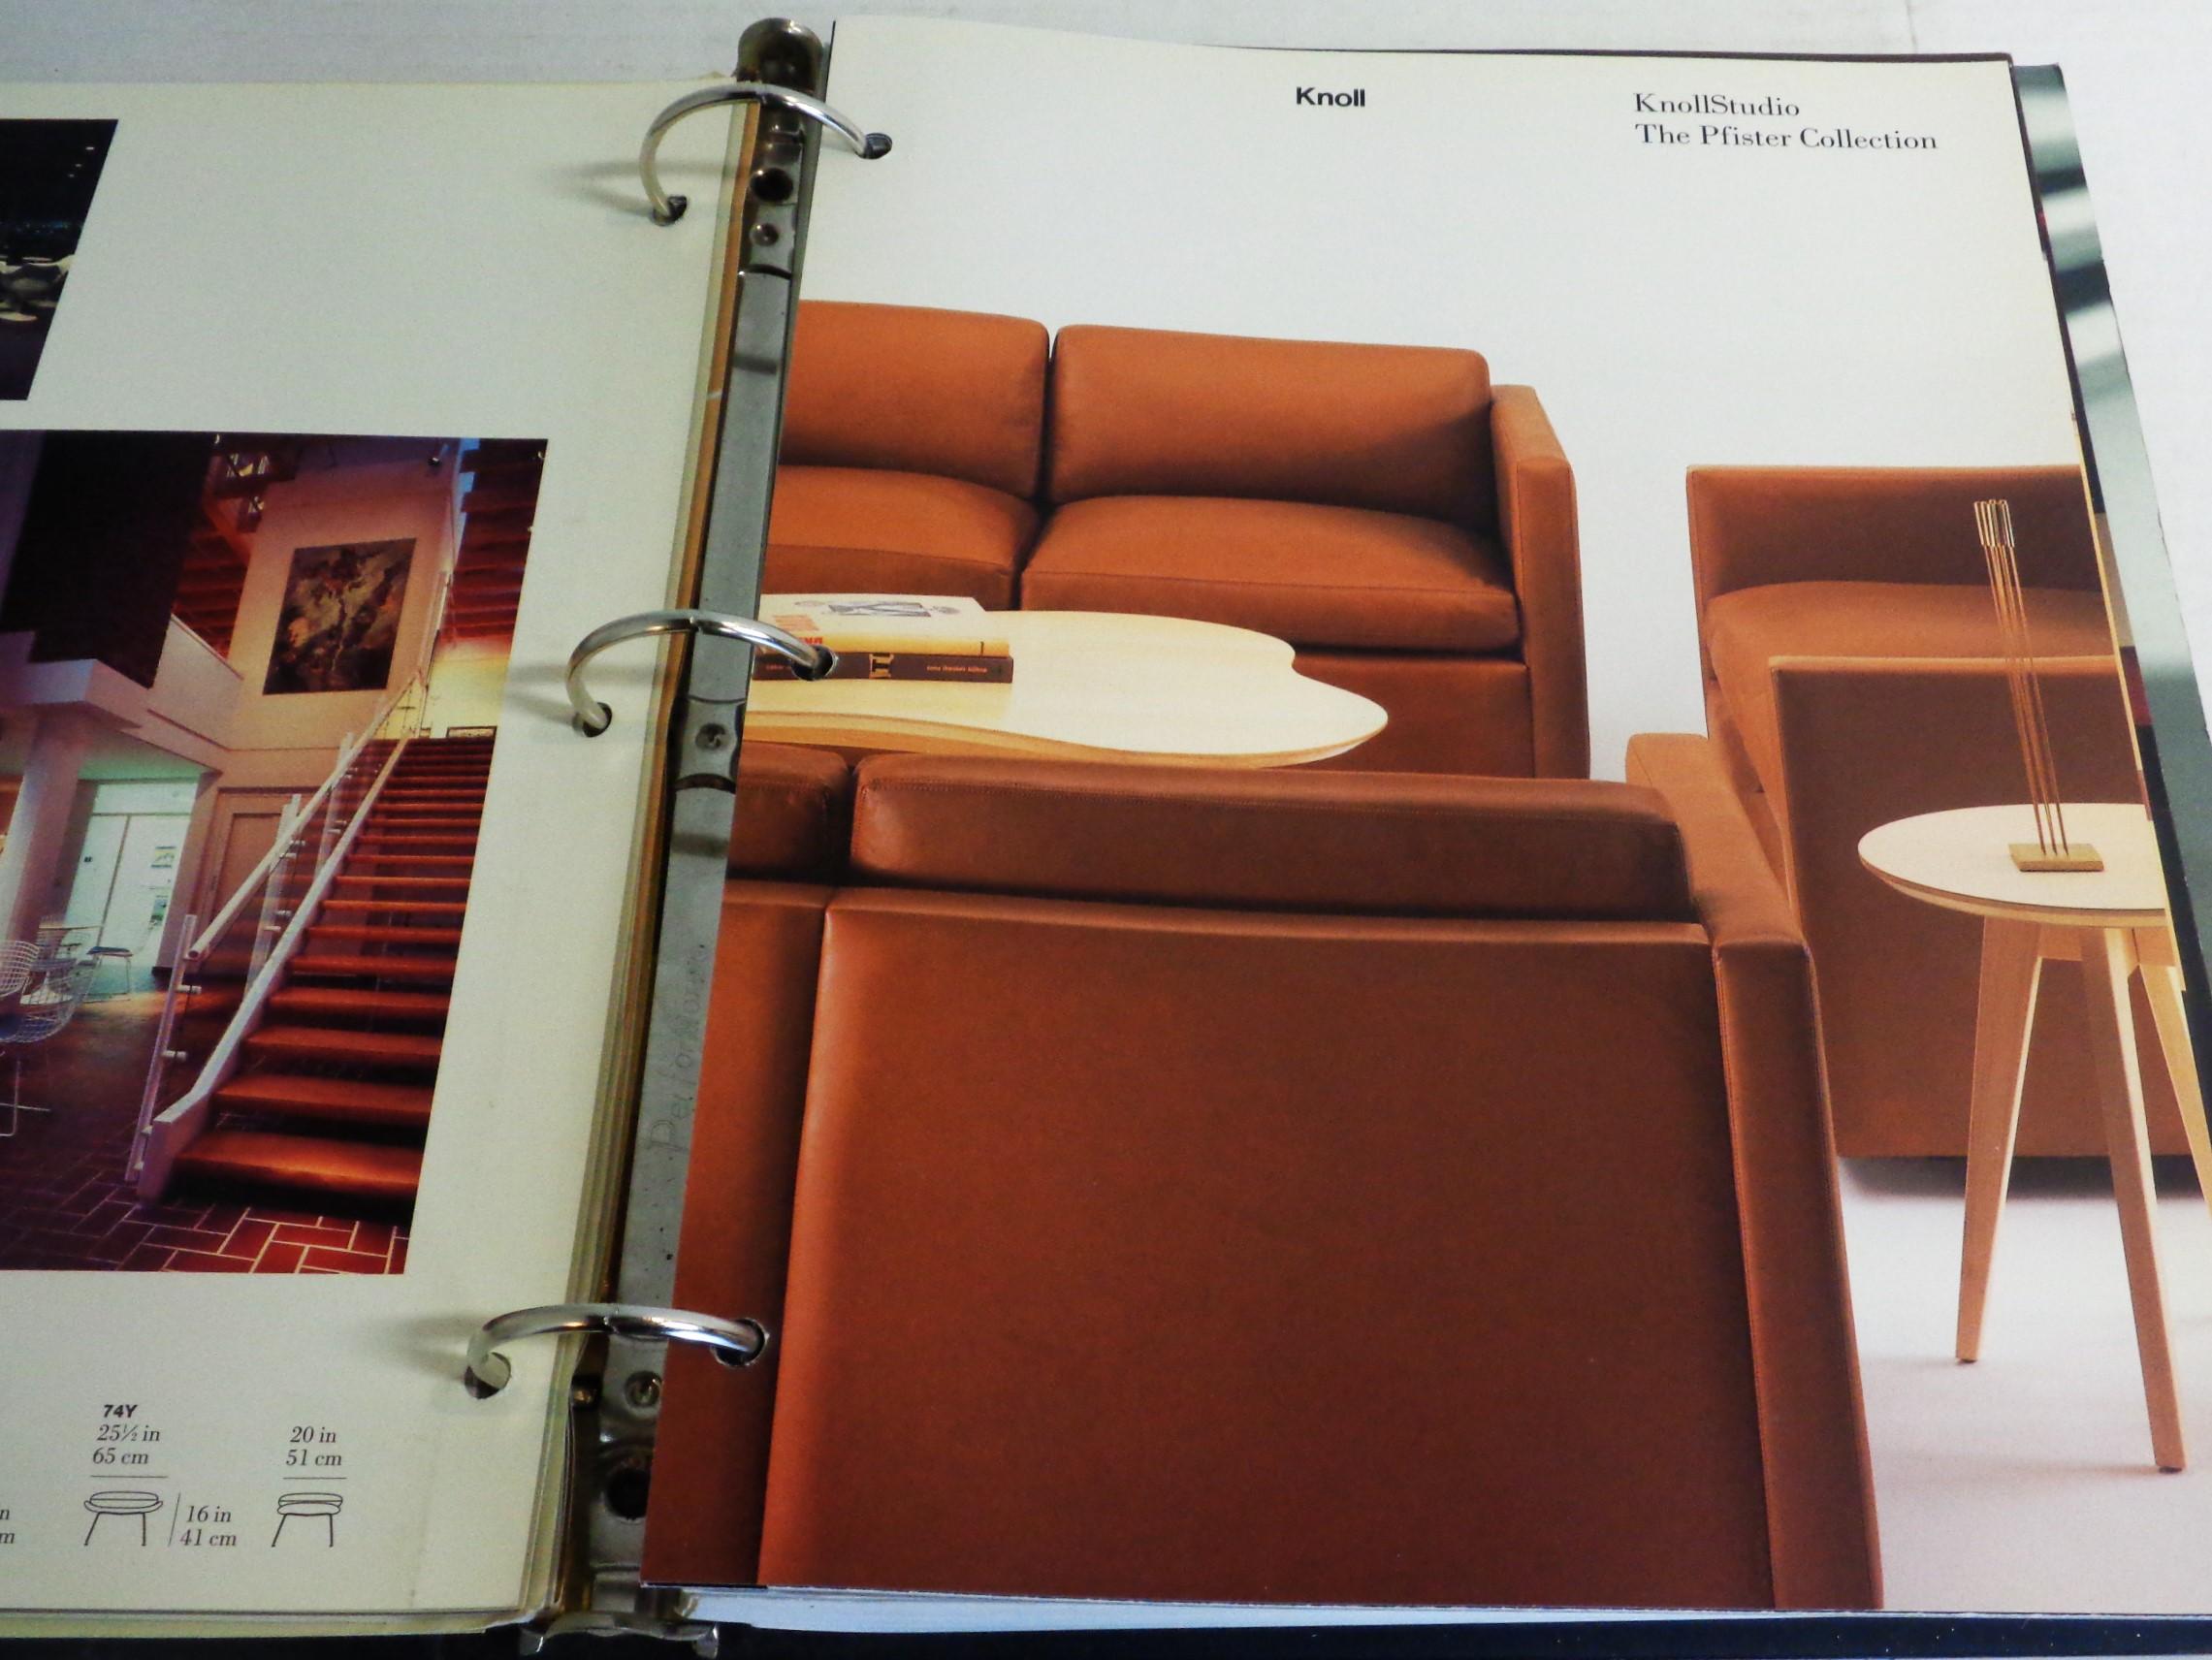 Knoll Studio Collection - Binder - Catalogues - Price List - Year 2000 For Sale 1